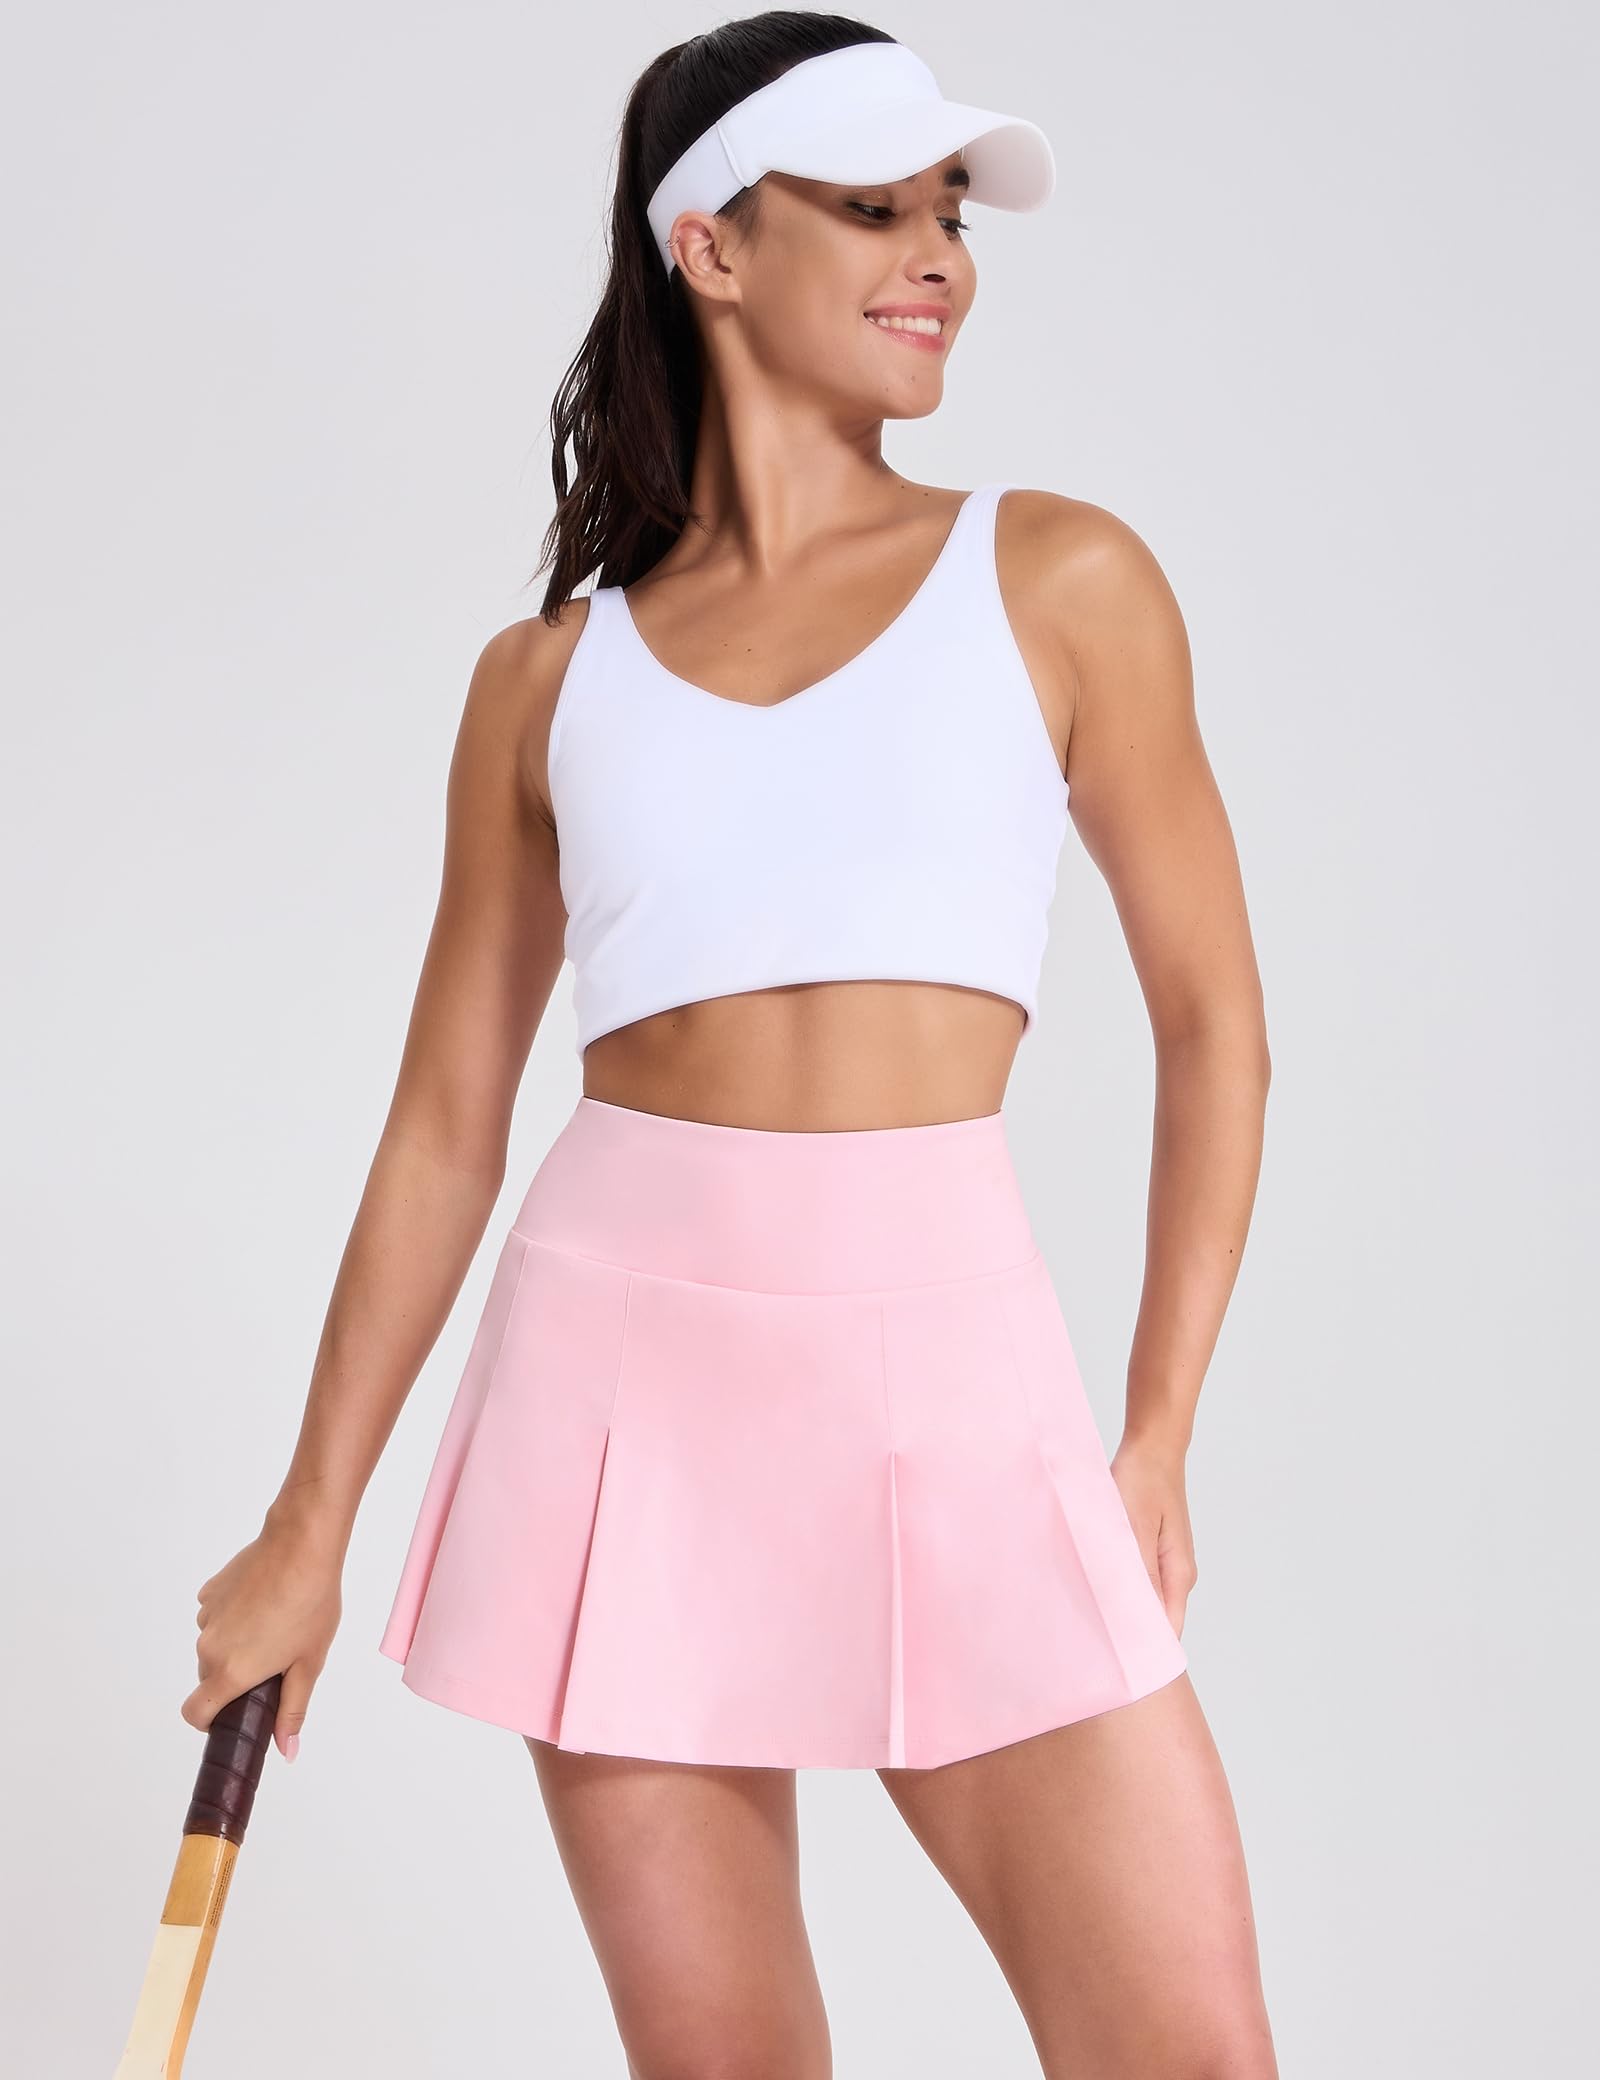 Tennis Skirts for Women Pleated Golf Skirt Shorts with Pockets